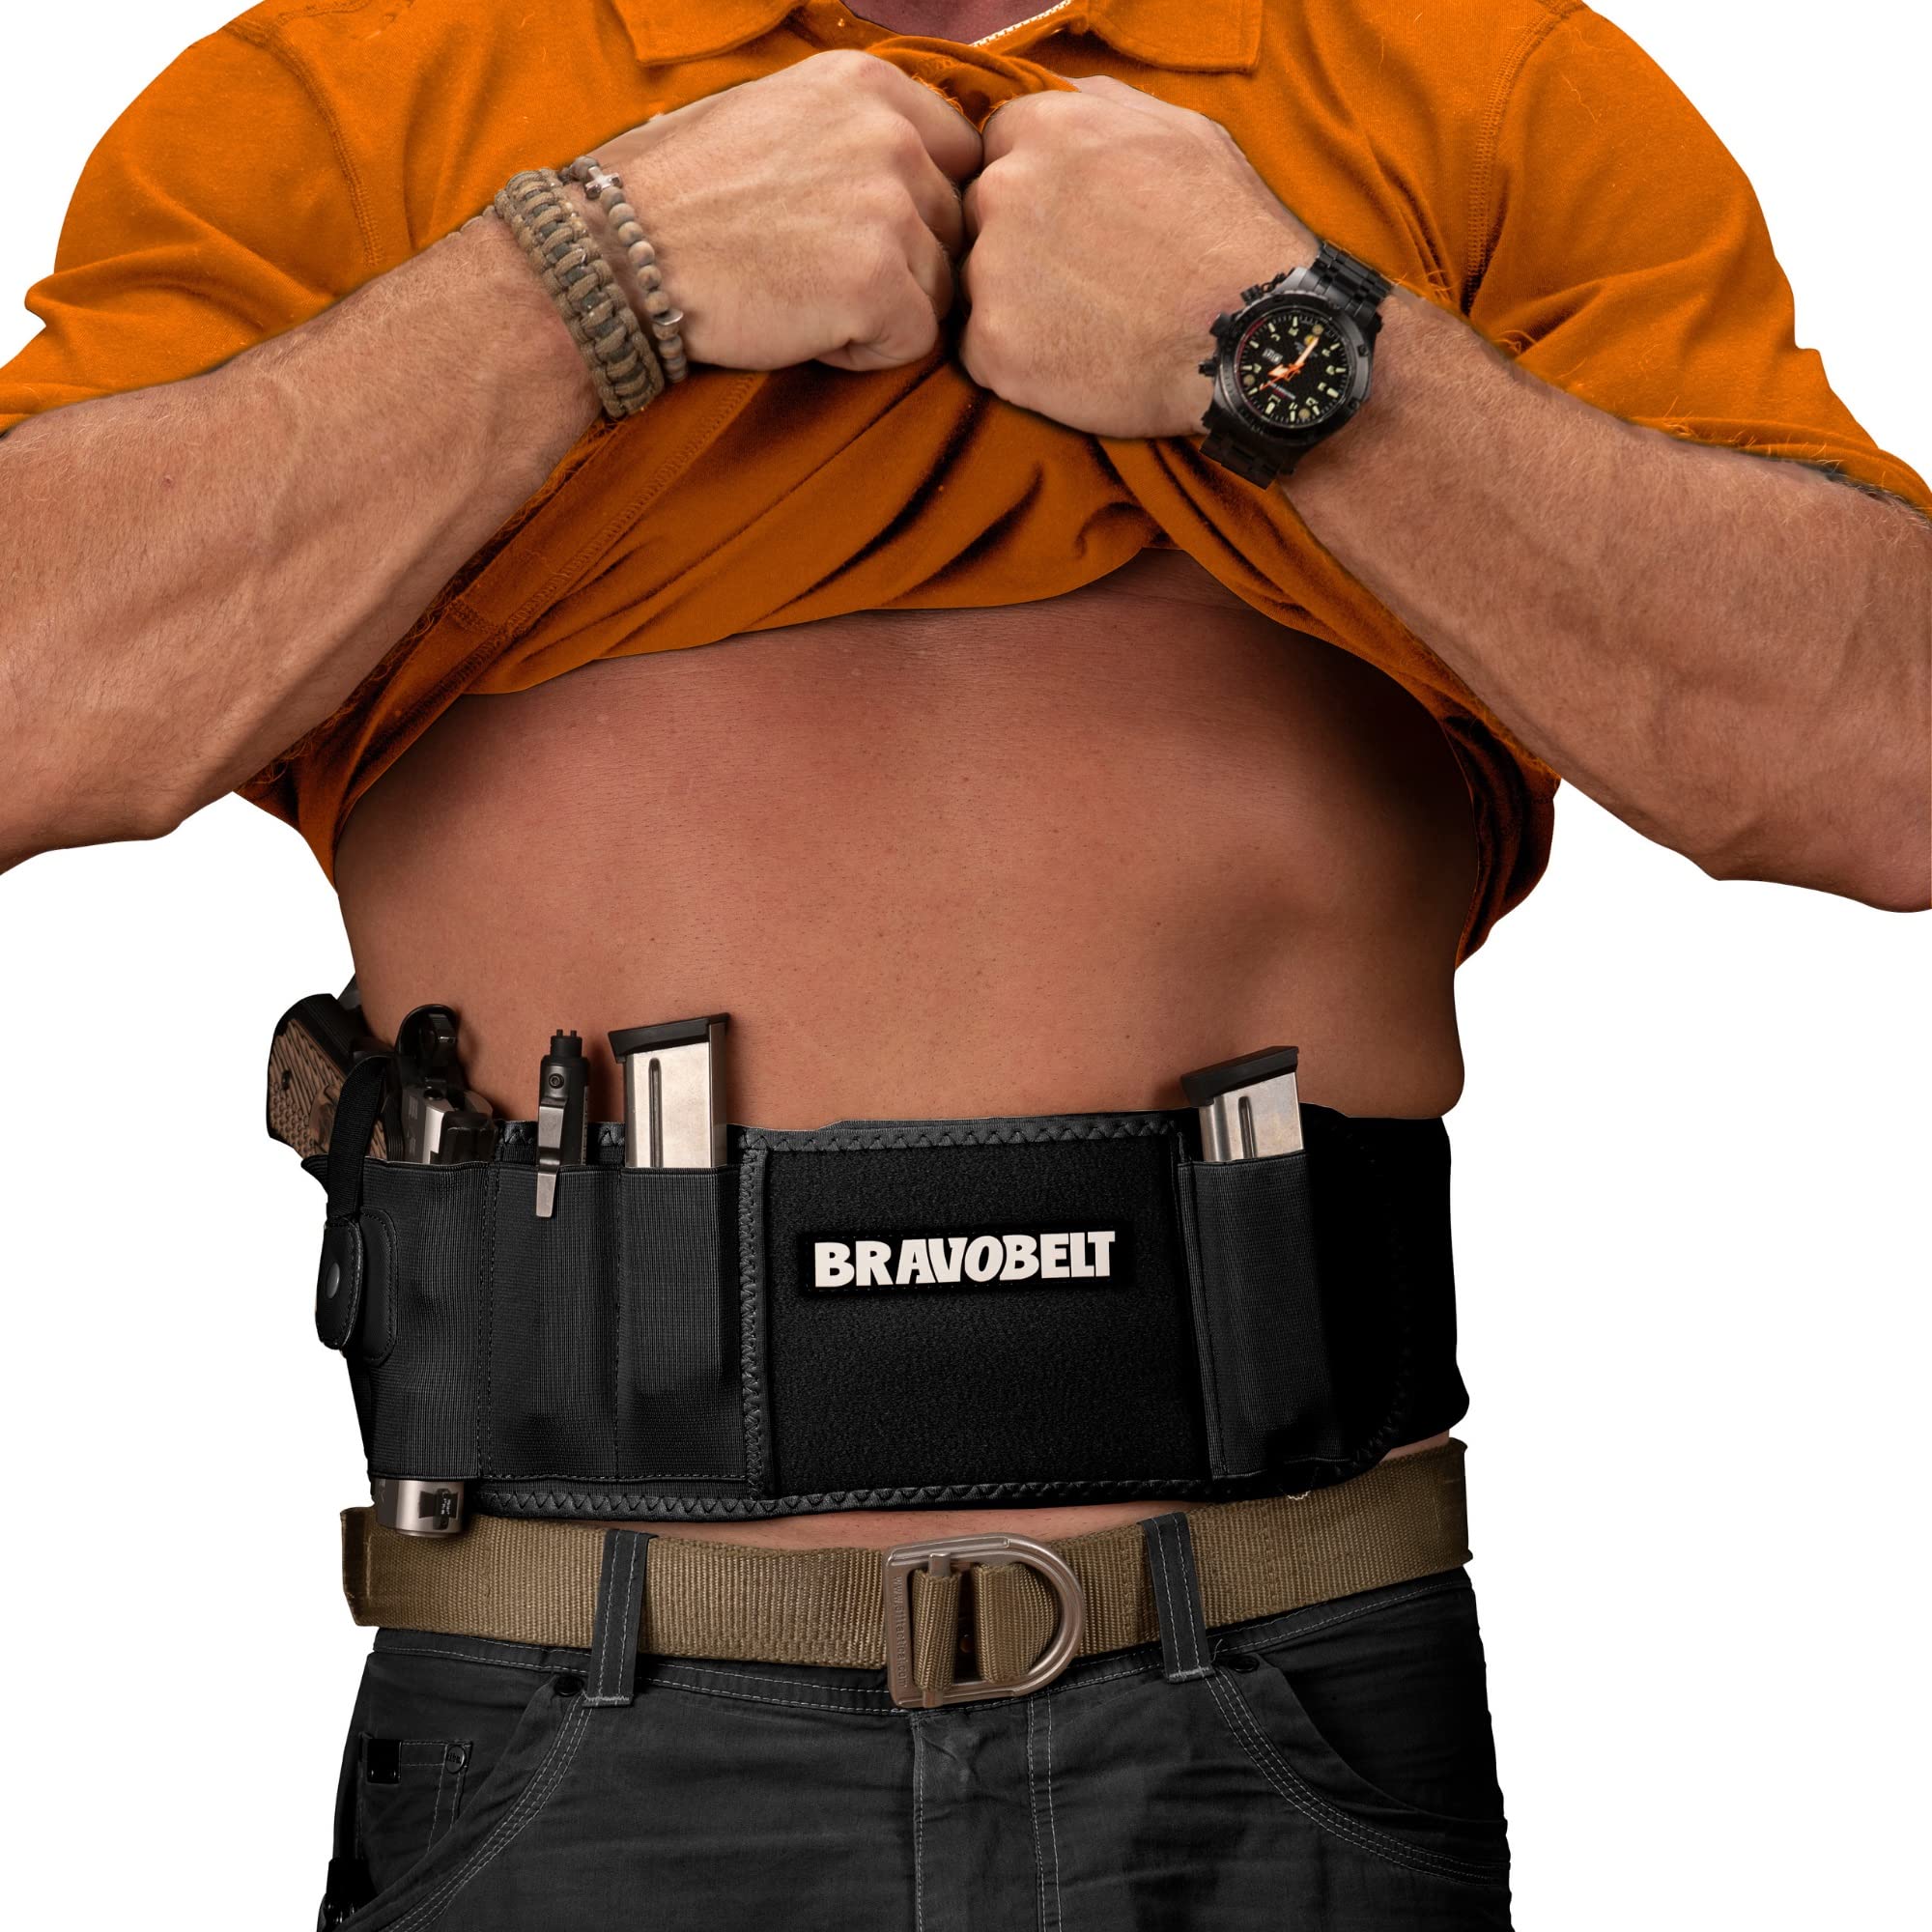 Benefits of Athletic Wear Holsters